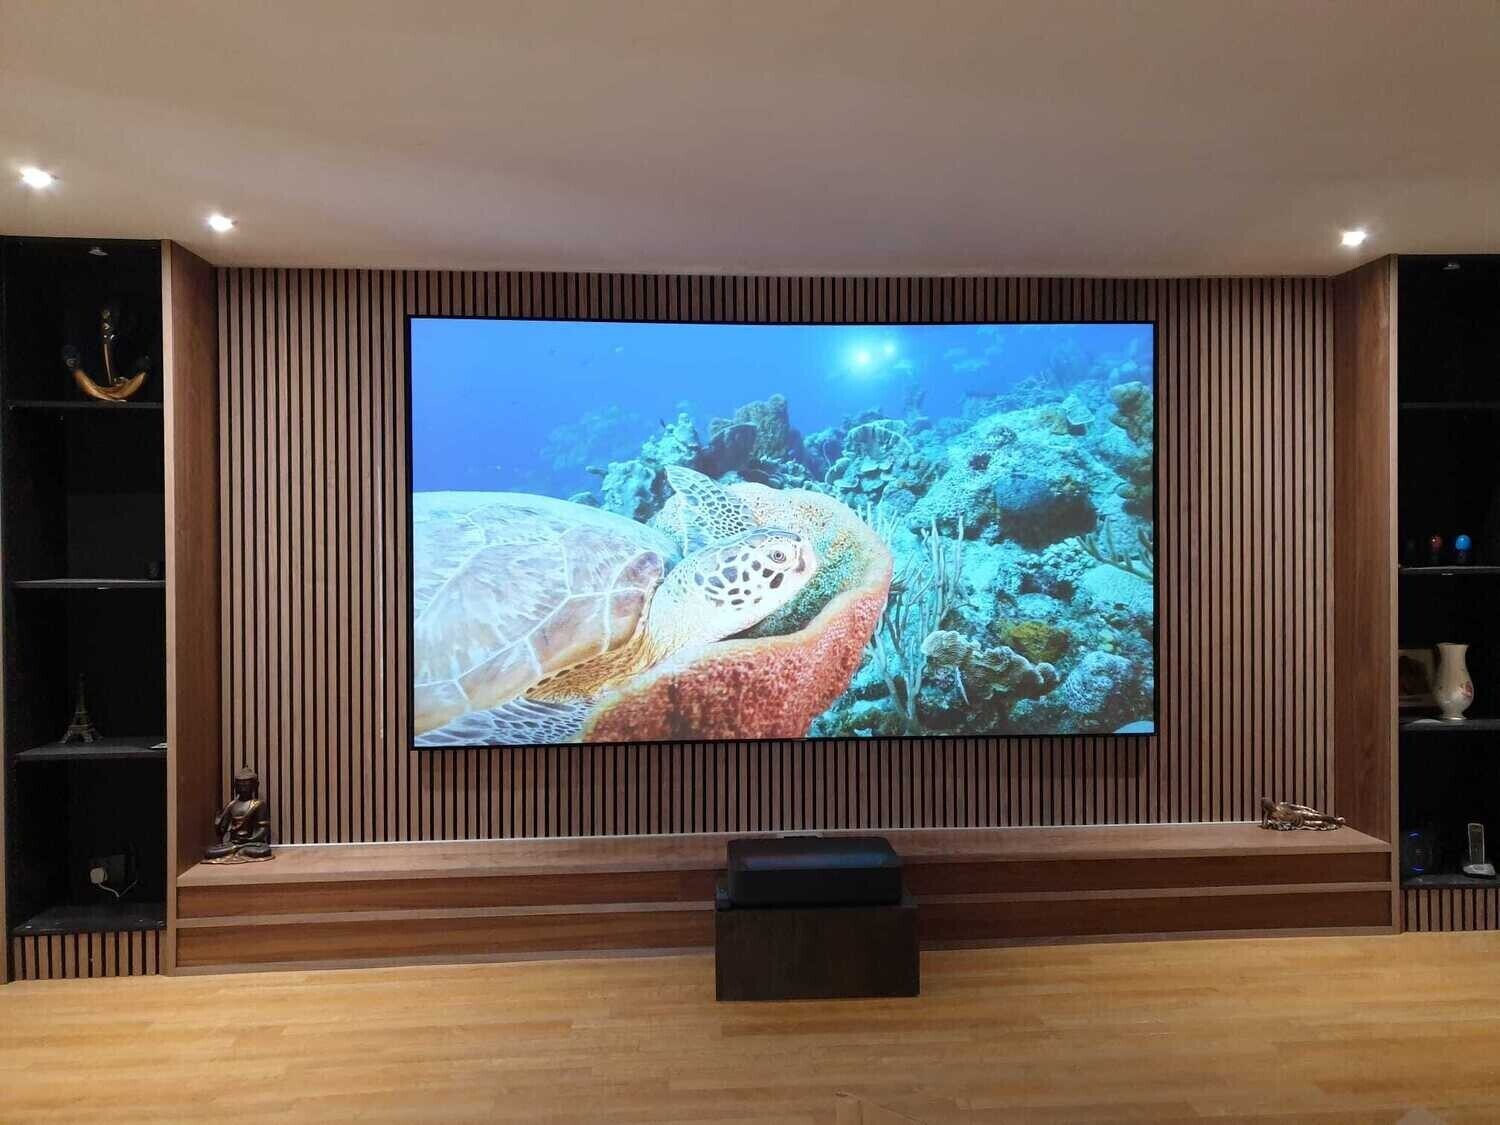 Formovie Theater 4k Triple laser UST Projector + XY Screens ALR 92" PET Crystal Fixed Frame Screen